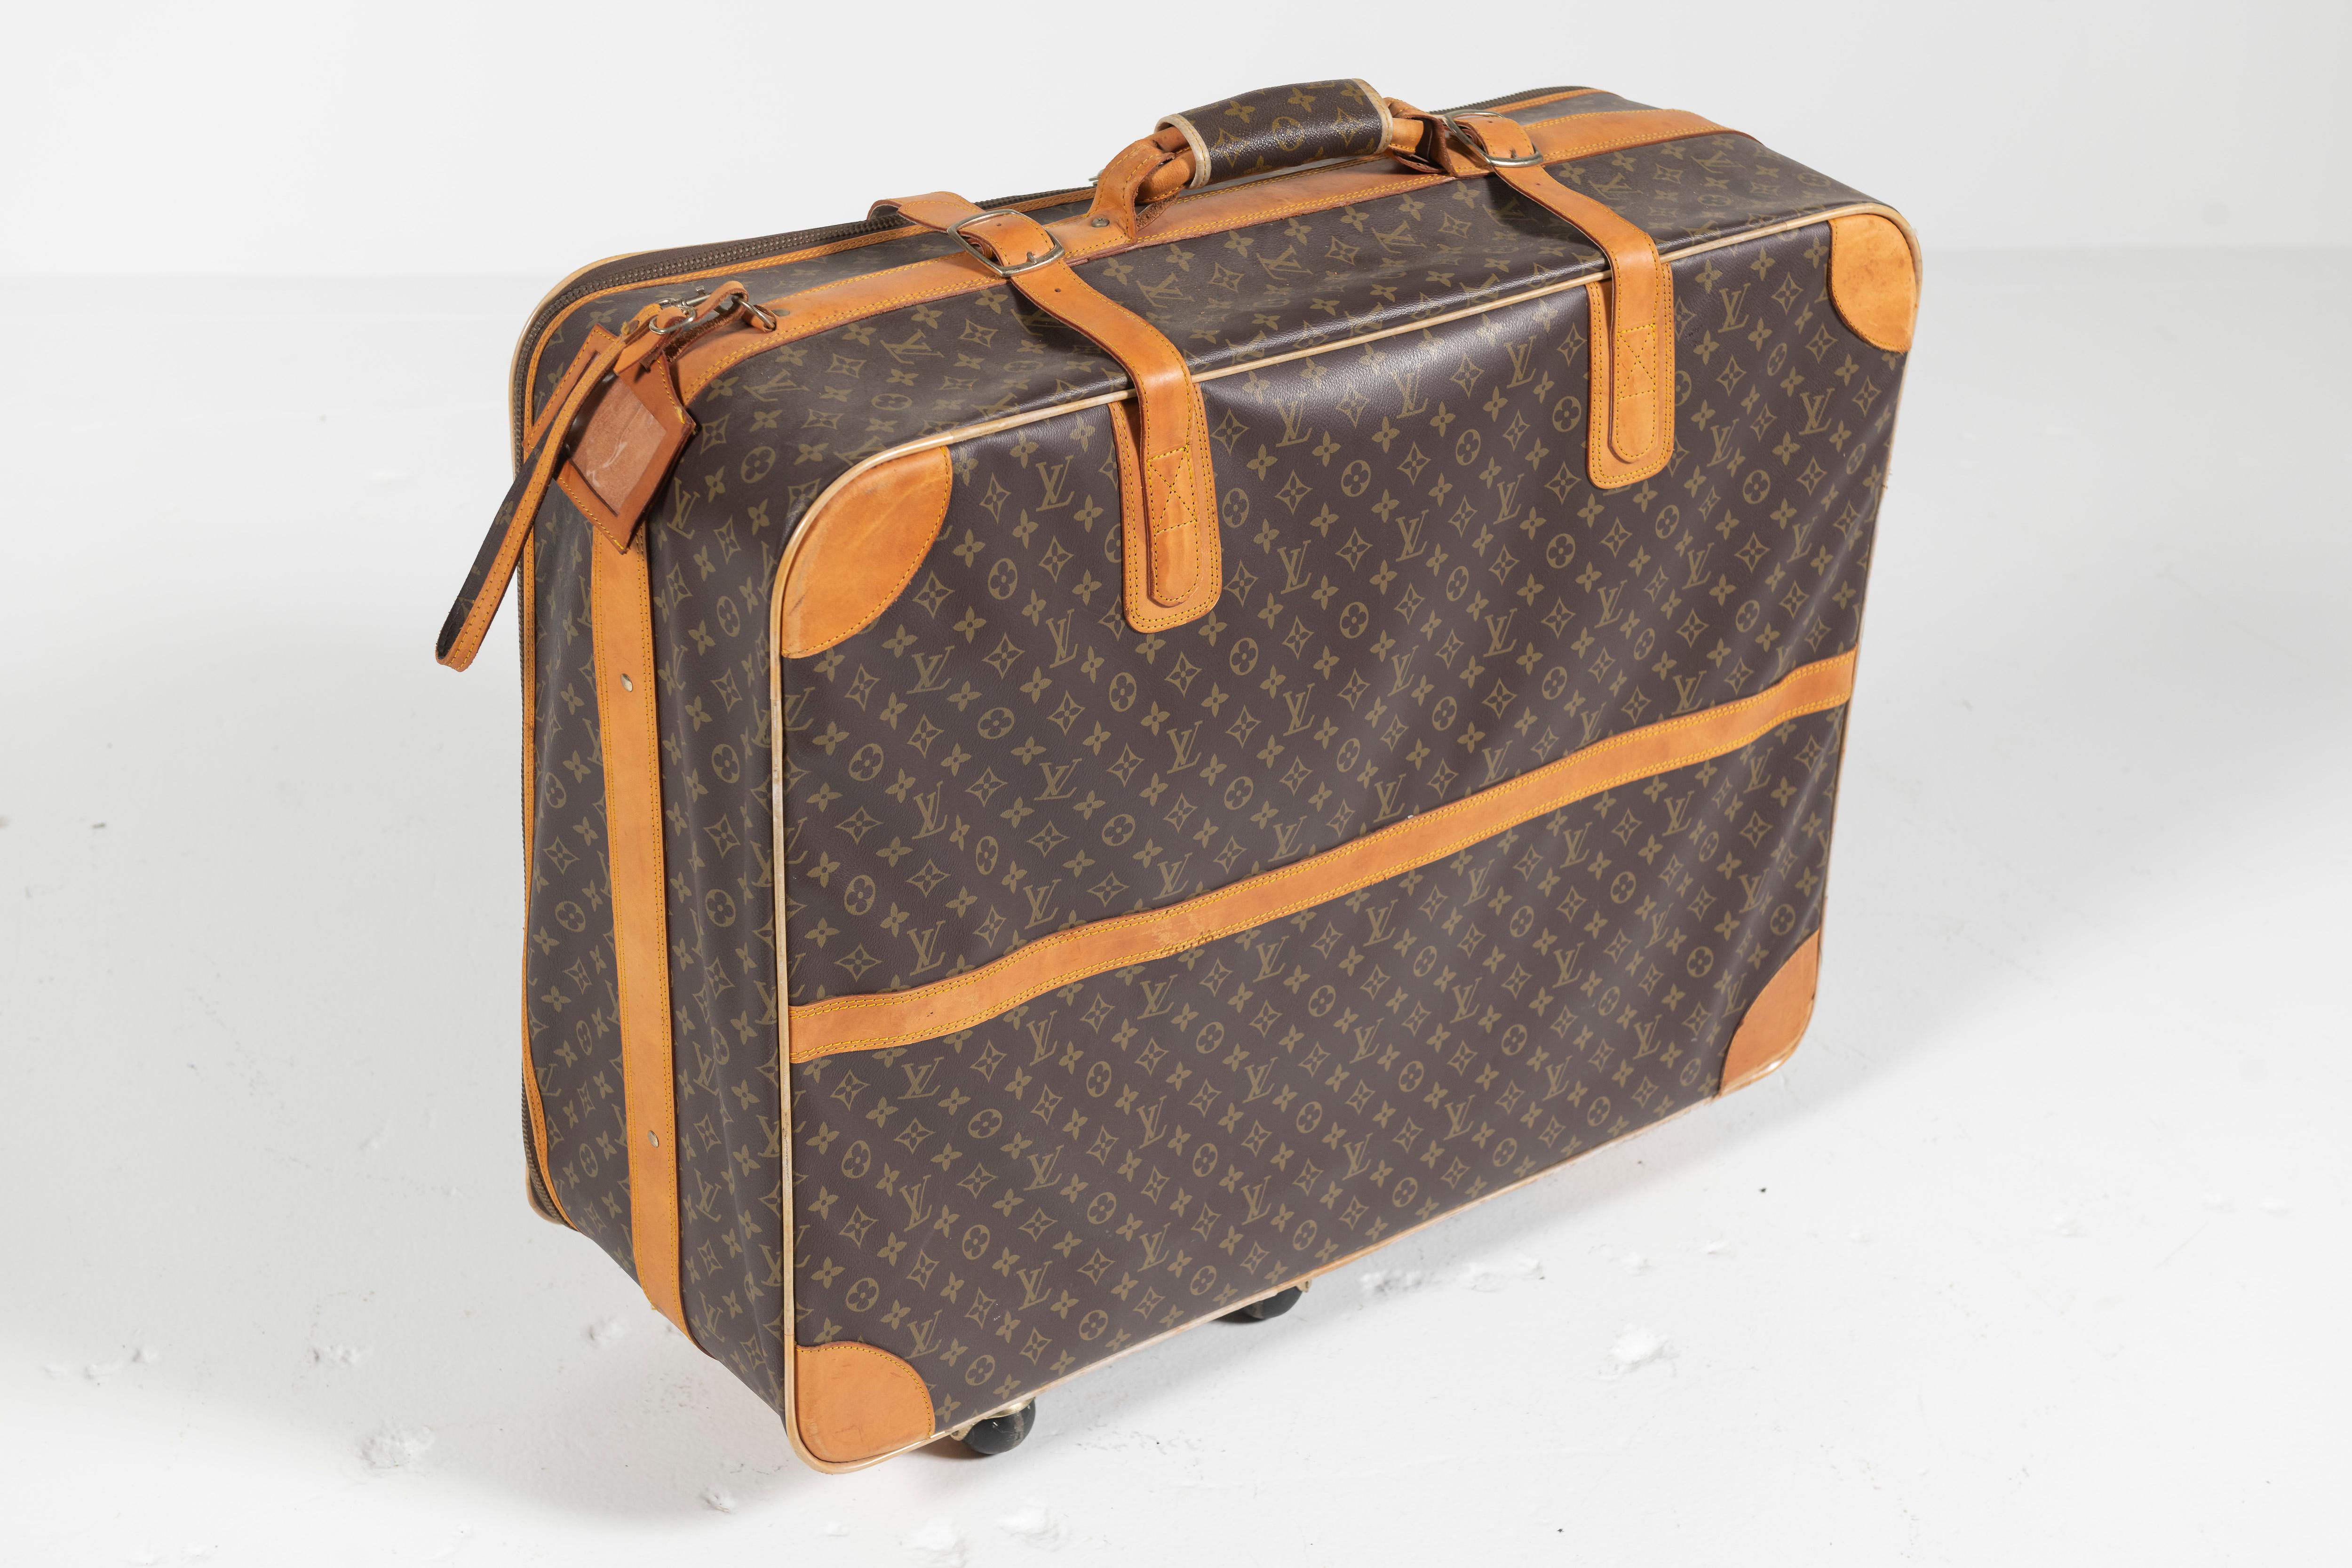 French Vintage Louis Vuitton Suitcase, Monogrammed Coated Canvas, Large-Sized For Sale